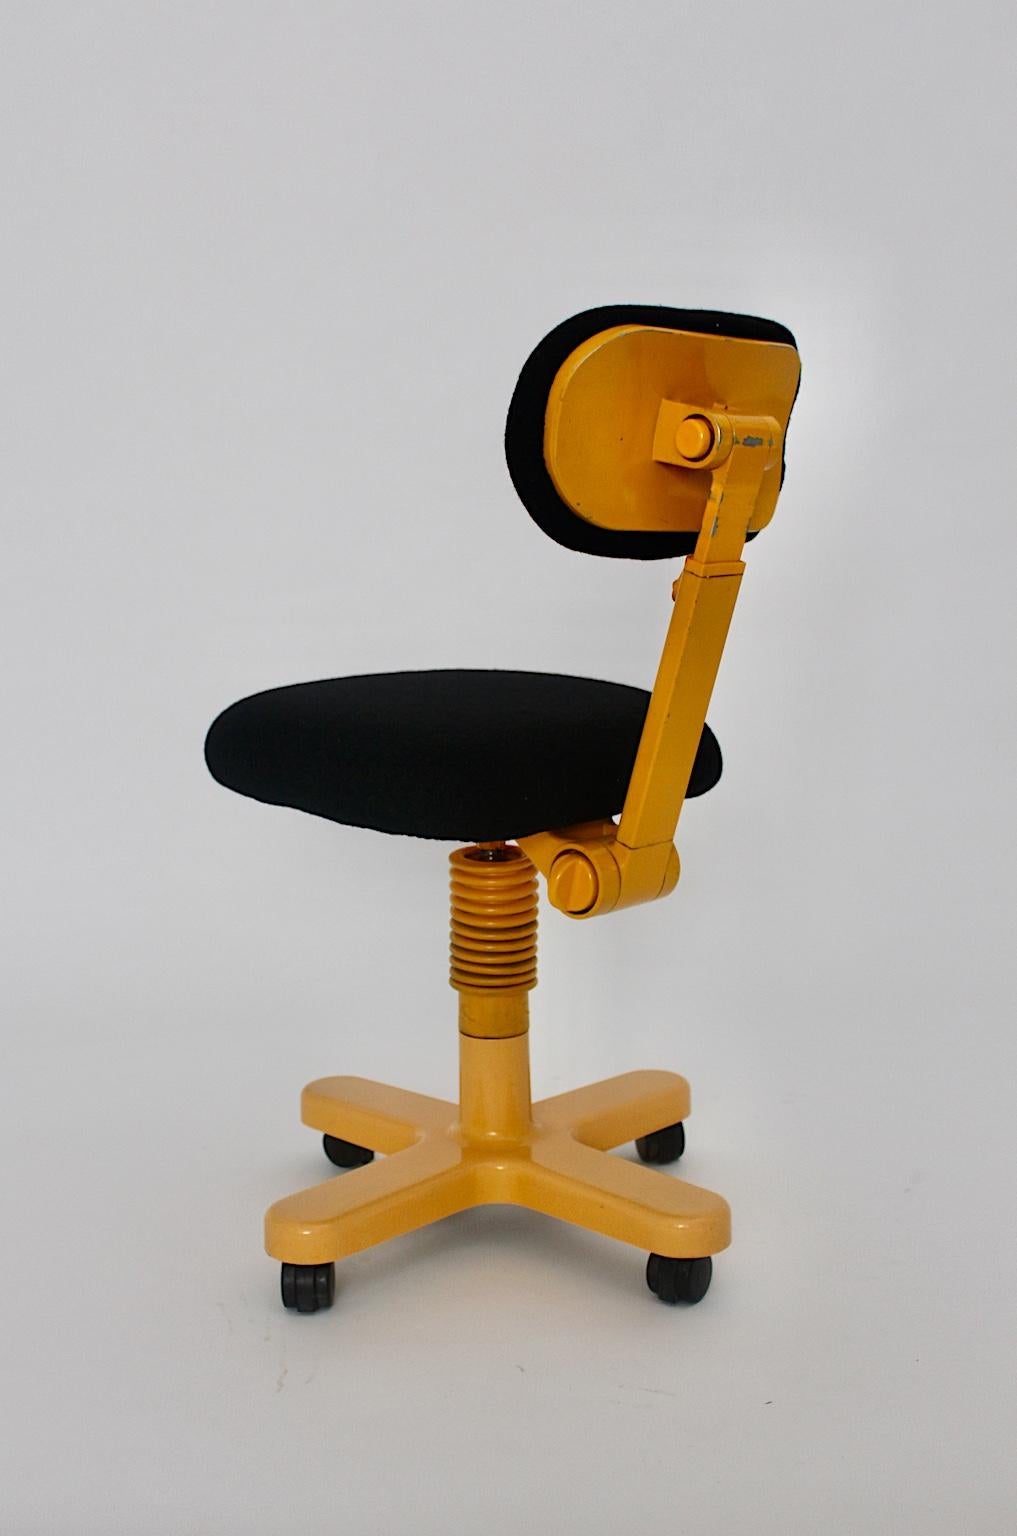 Space Age vintage yellow and black desk chair or office chair Synthesis designed by Ettore Sottsass for Olivetti 1968 Italy.
Ettore Sottsass designed in this time office equipments for Olivetti. He loved to integrate pops of colors into office